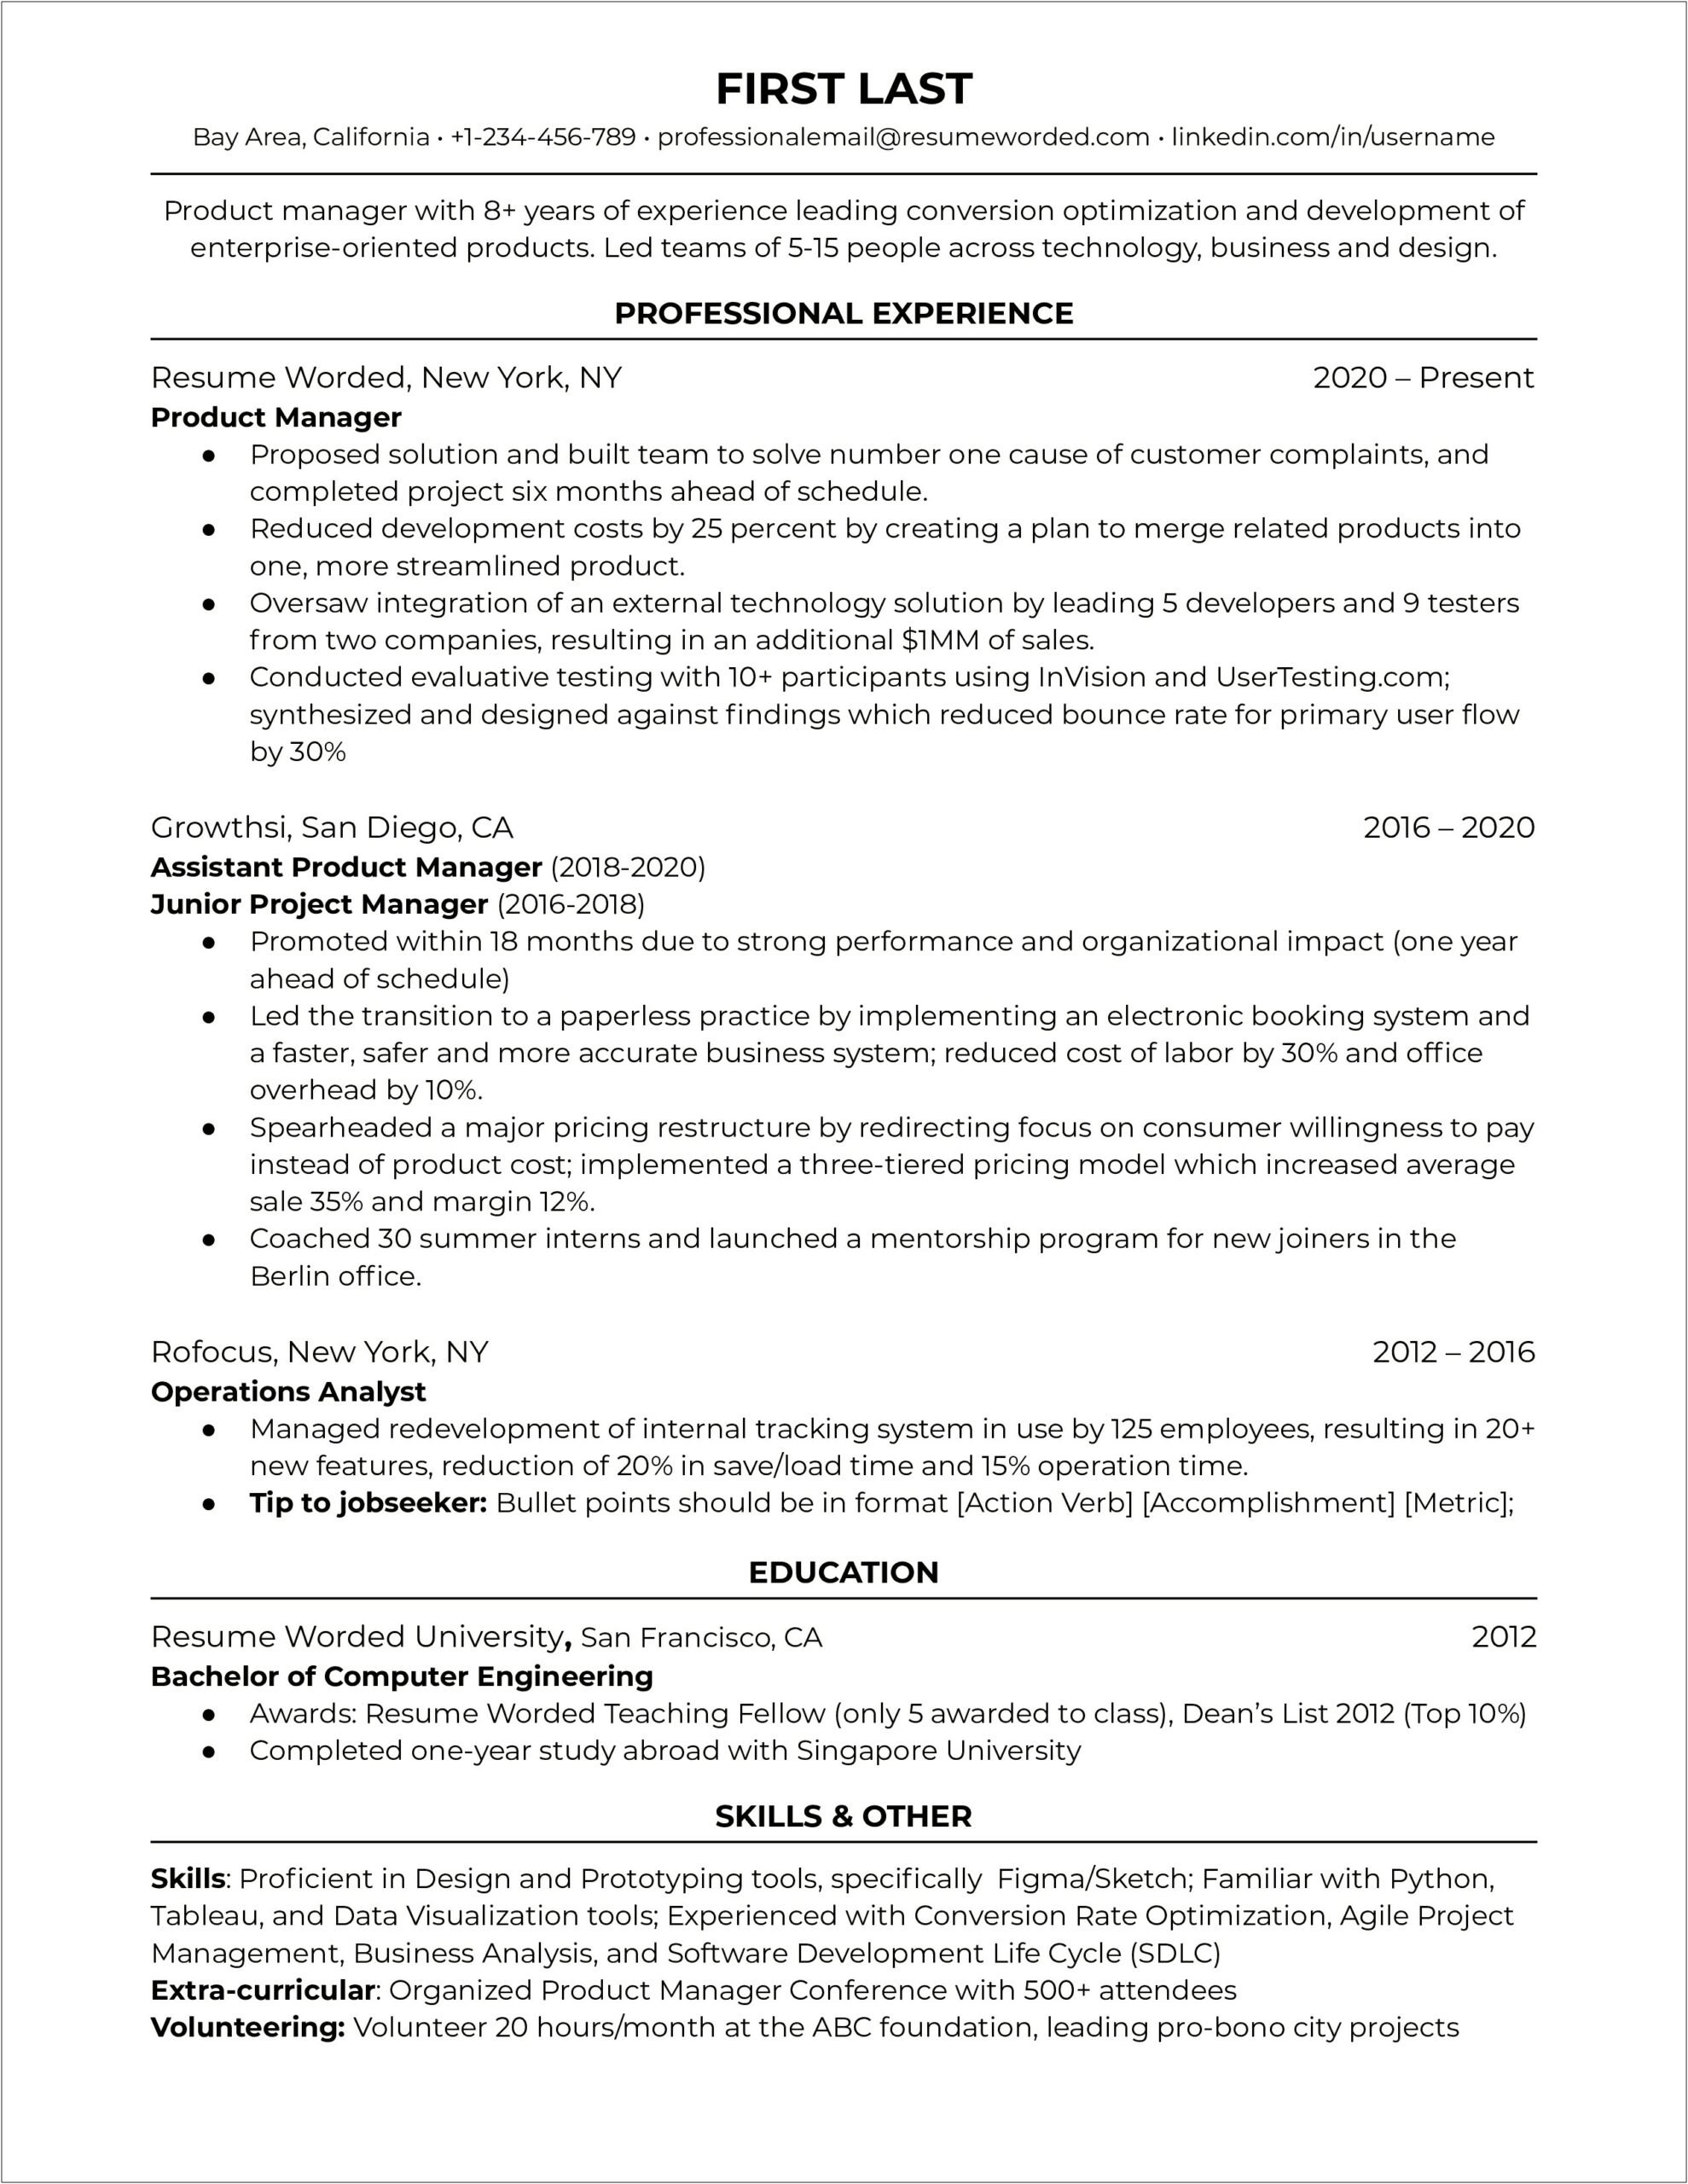 Resume Summary For Product Manager